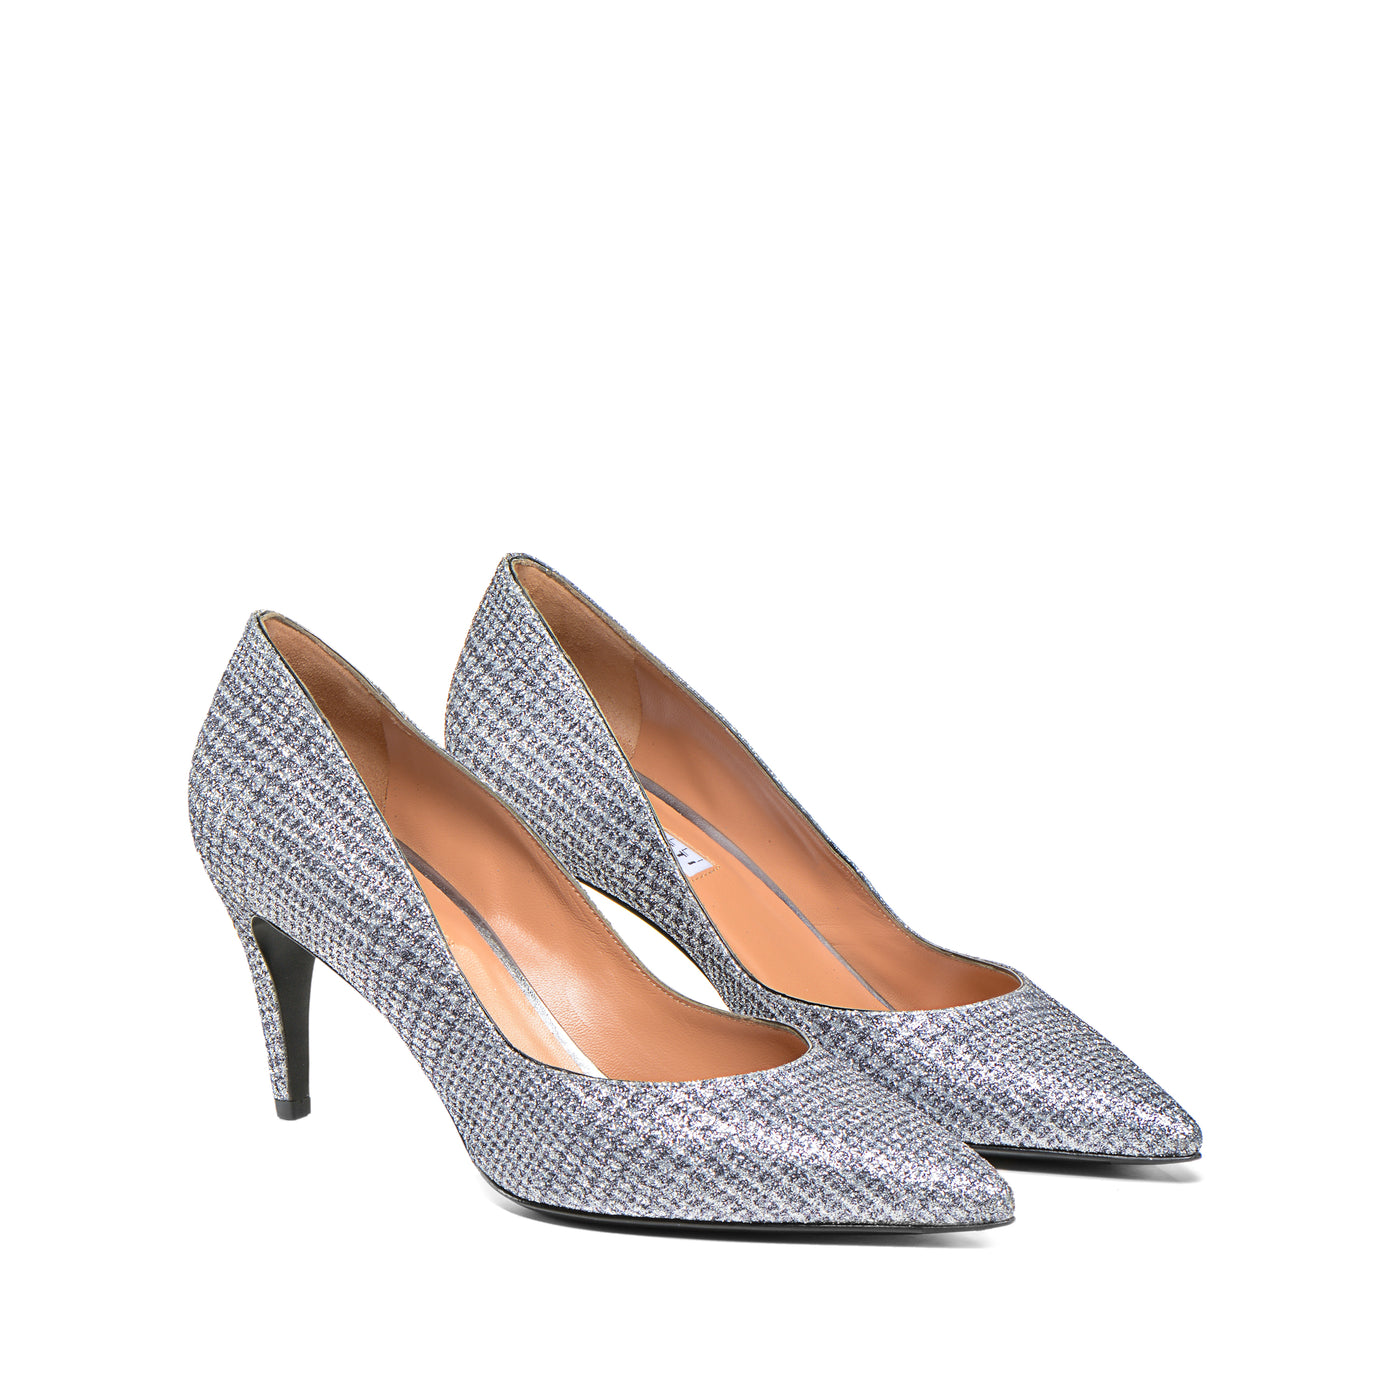 Shop The Latest Collection Of Outlet - Fratelli Rossetti Woman Pump 66693 In Lebanon